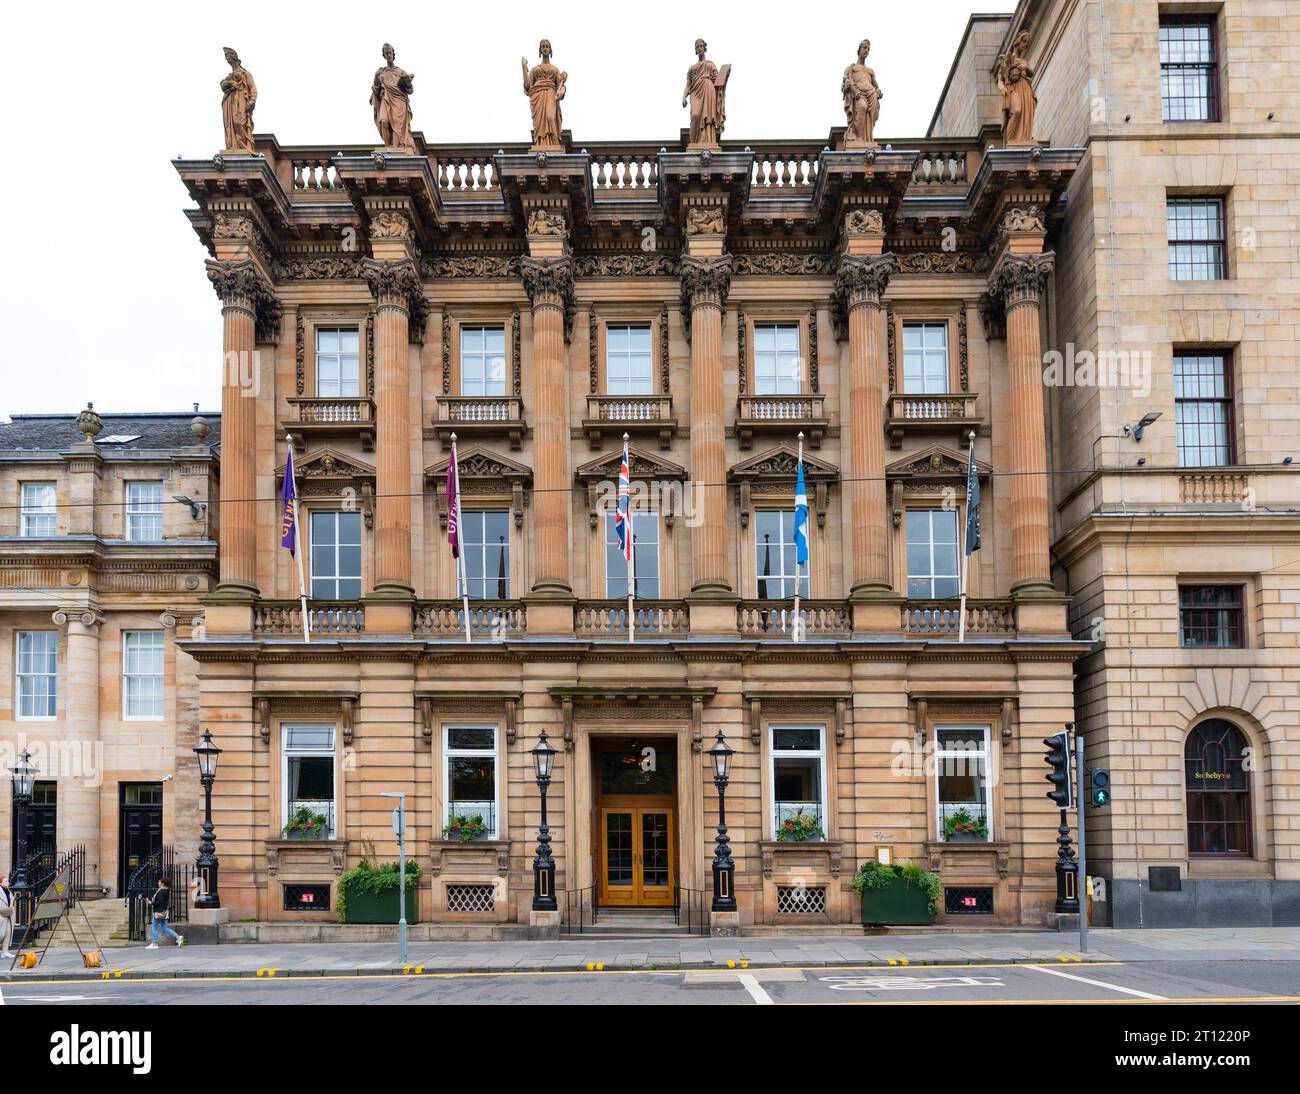 Exterior of the Gleneagles Townhouse hotel and club on St Andrew Square, Edinburgh, Scotland, UK Stock Photo